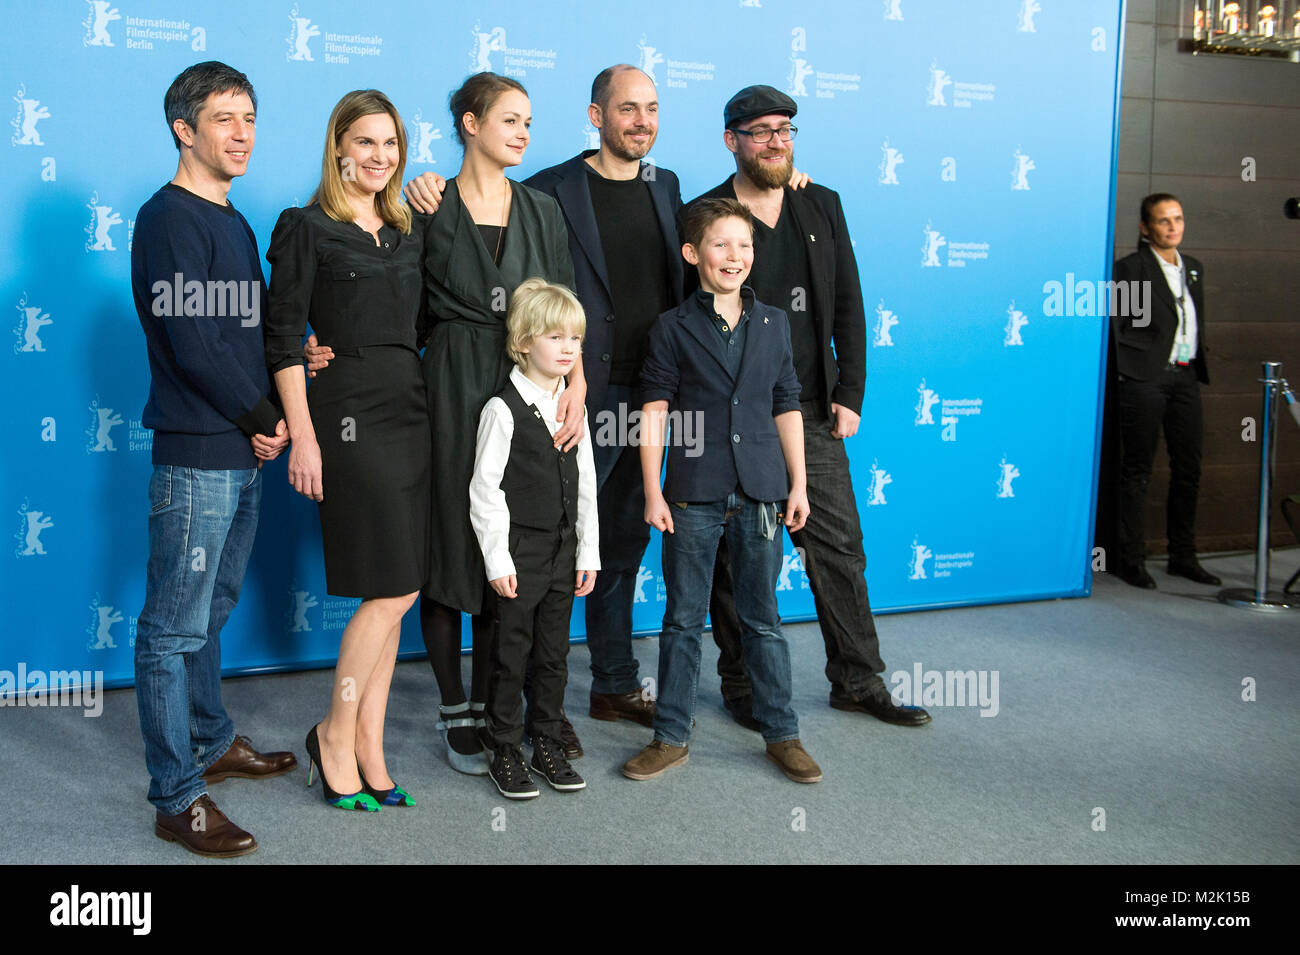 Director Edward Berger presented the new movie ‘Jack’ in Berlinale with the actors  Ivo Pietzcker and Luise Heyer. Stock Photo